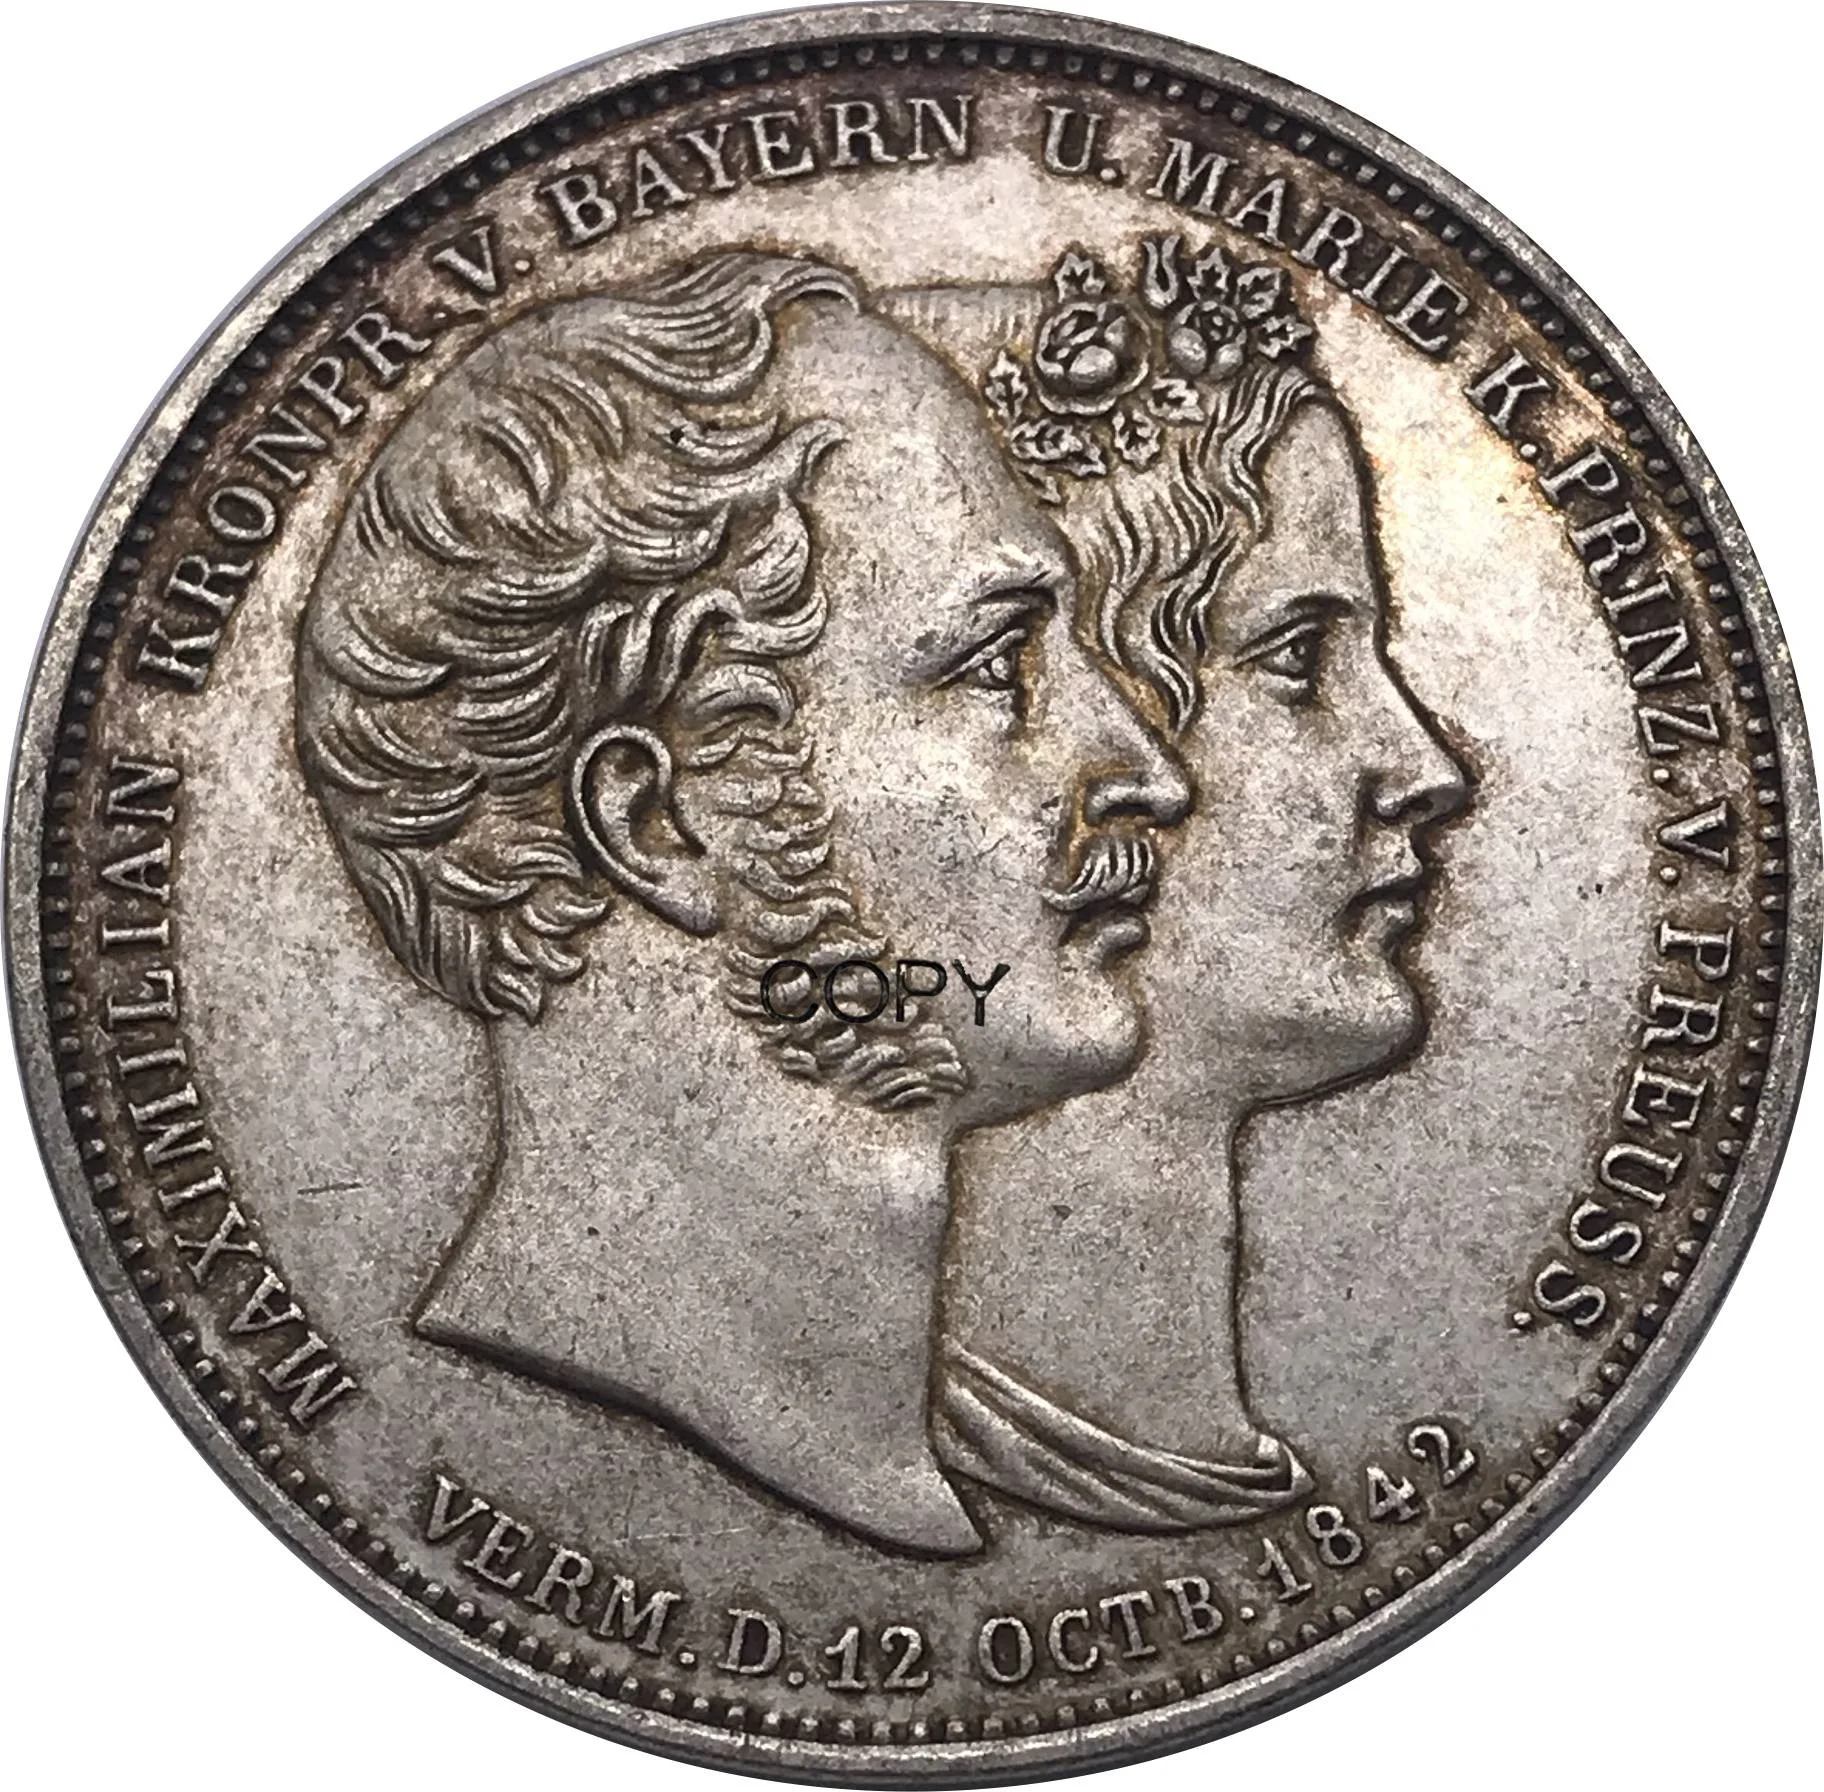 

German States 1842 Coin 2 Thaler 3 1/2 Gulden - Ludwig I Marriage Metal Cupronickel Plated Silver Souvenir Replica Copy Coins